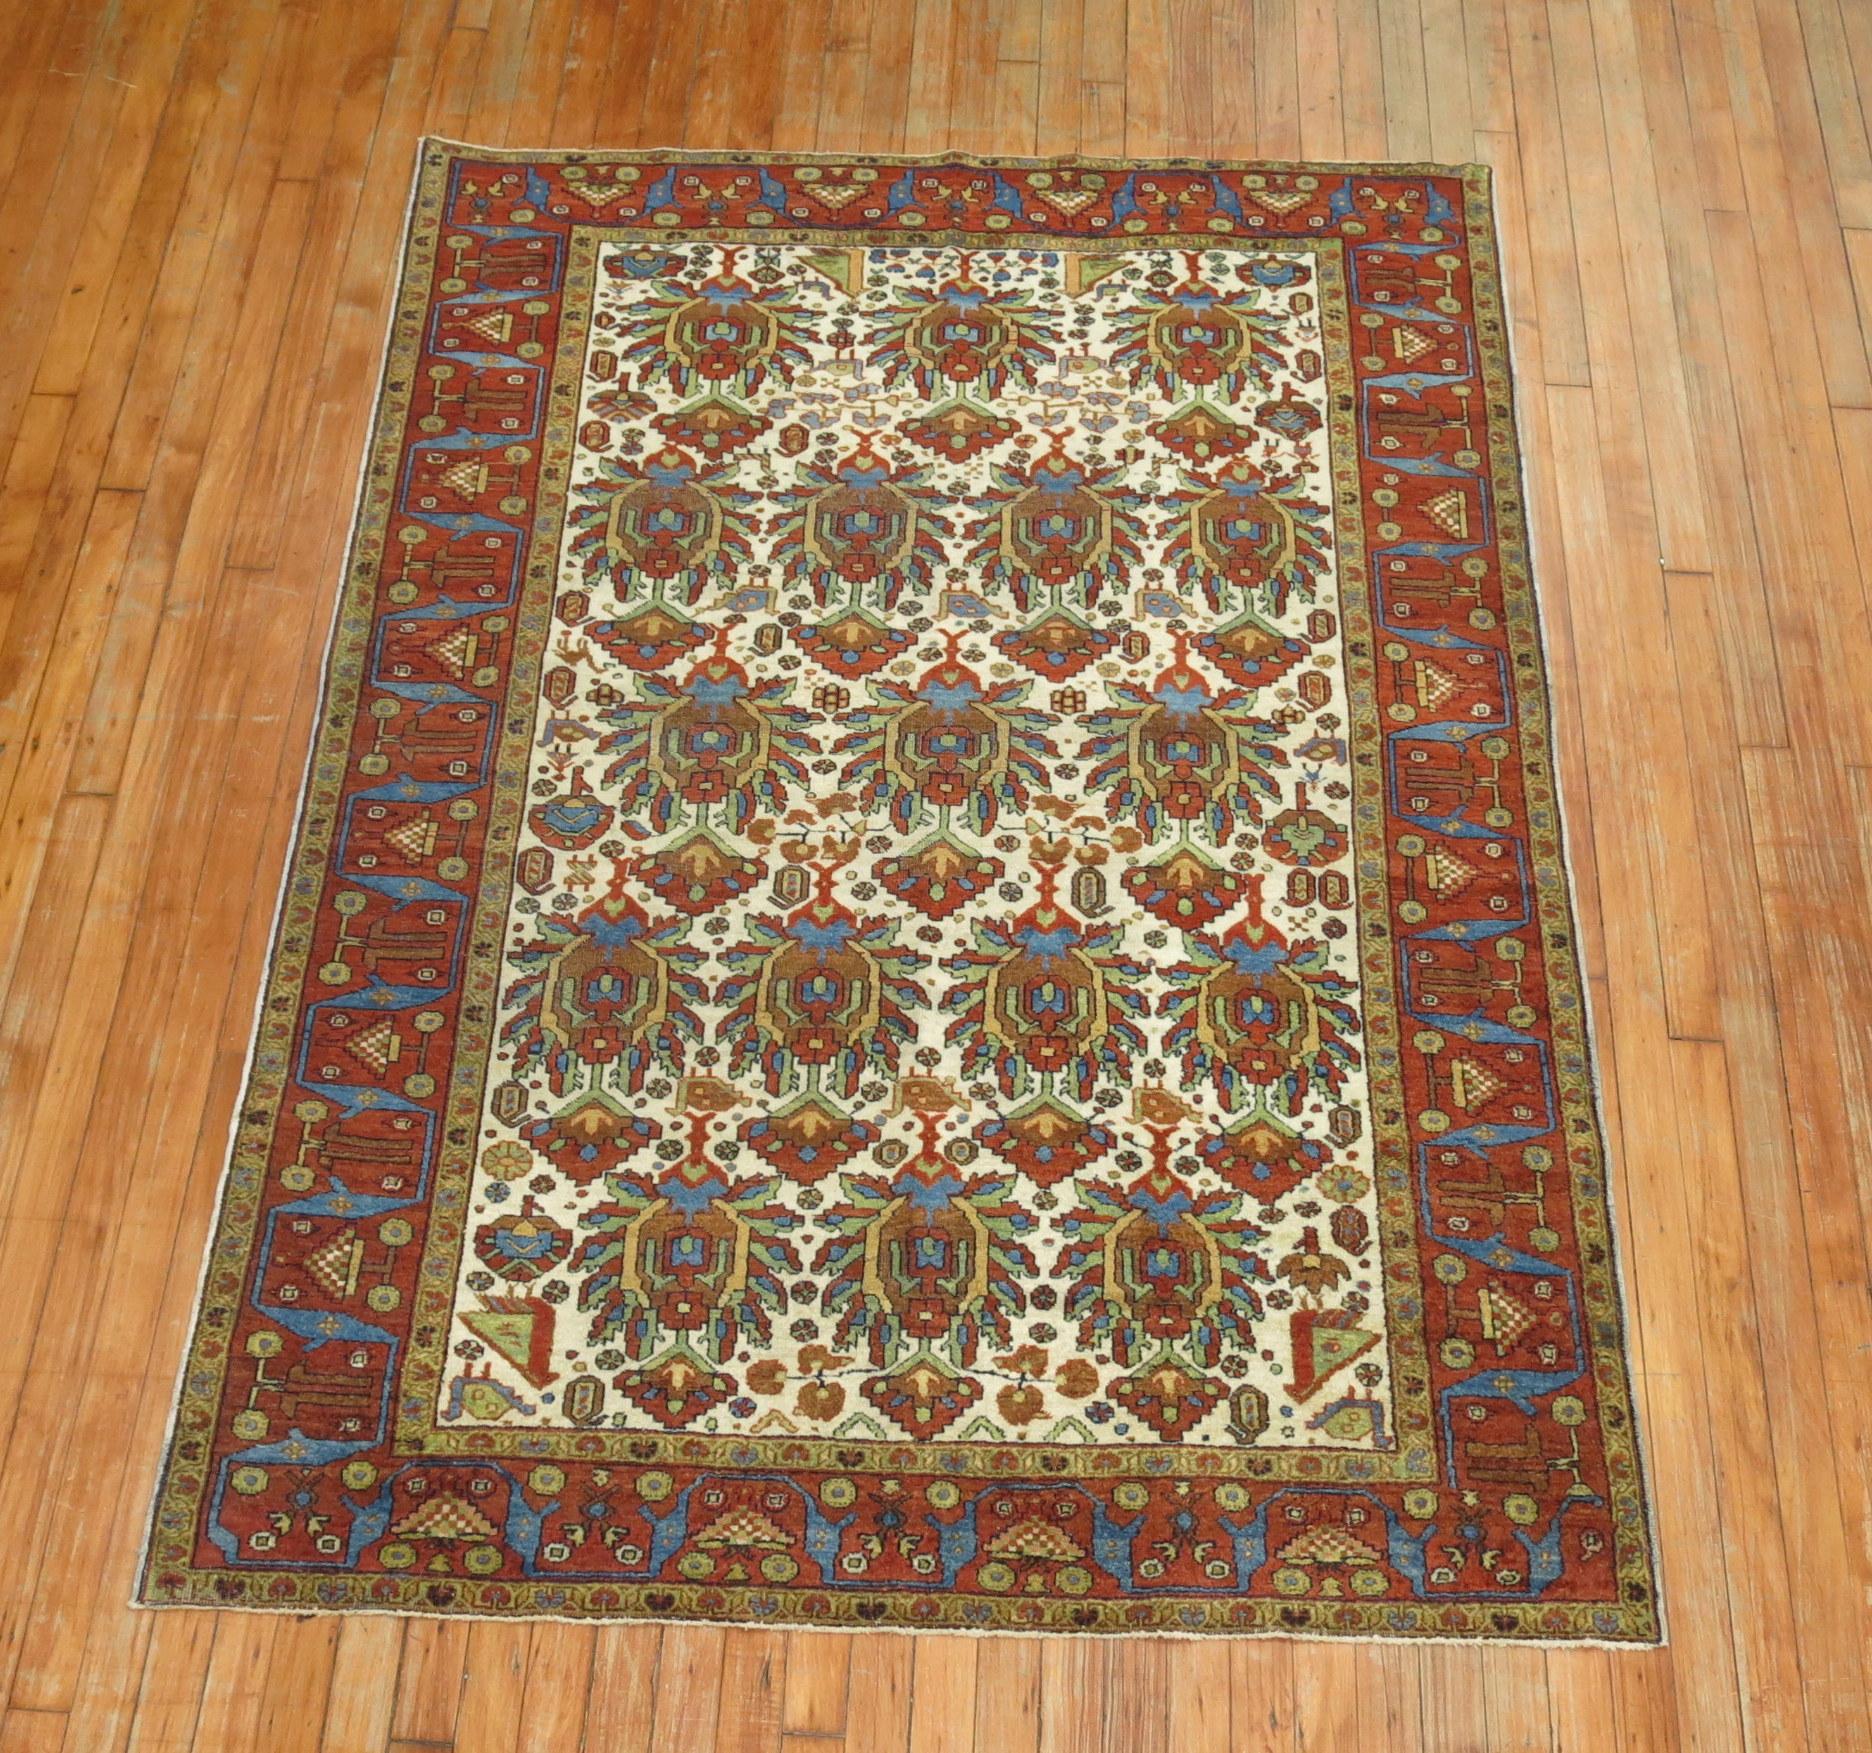 High collectible Northwest Persian rug from the early 20th century.